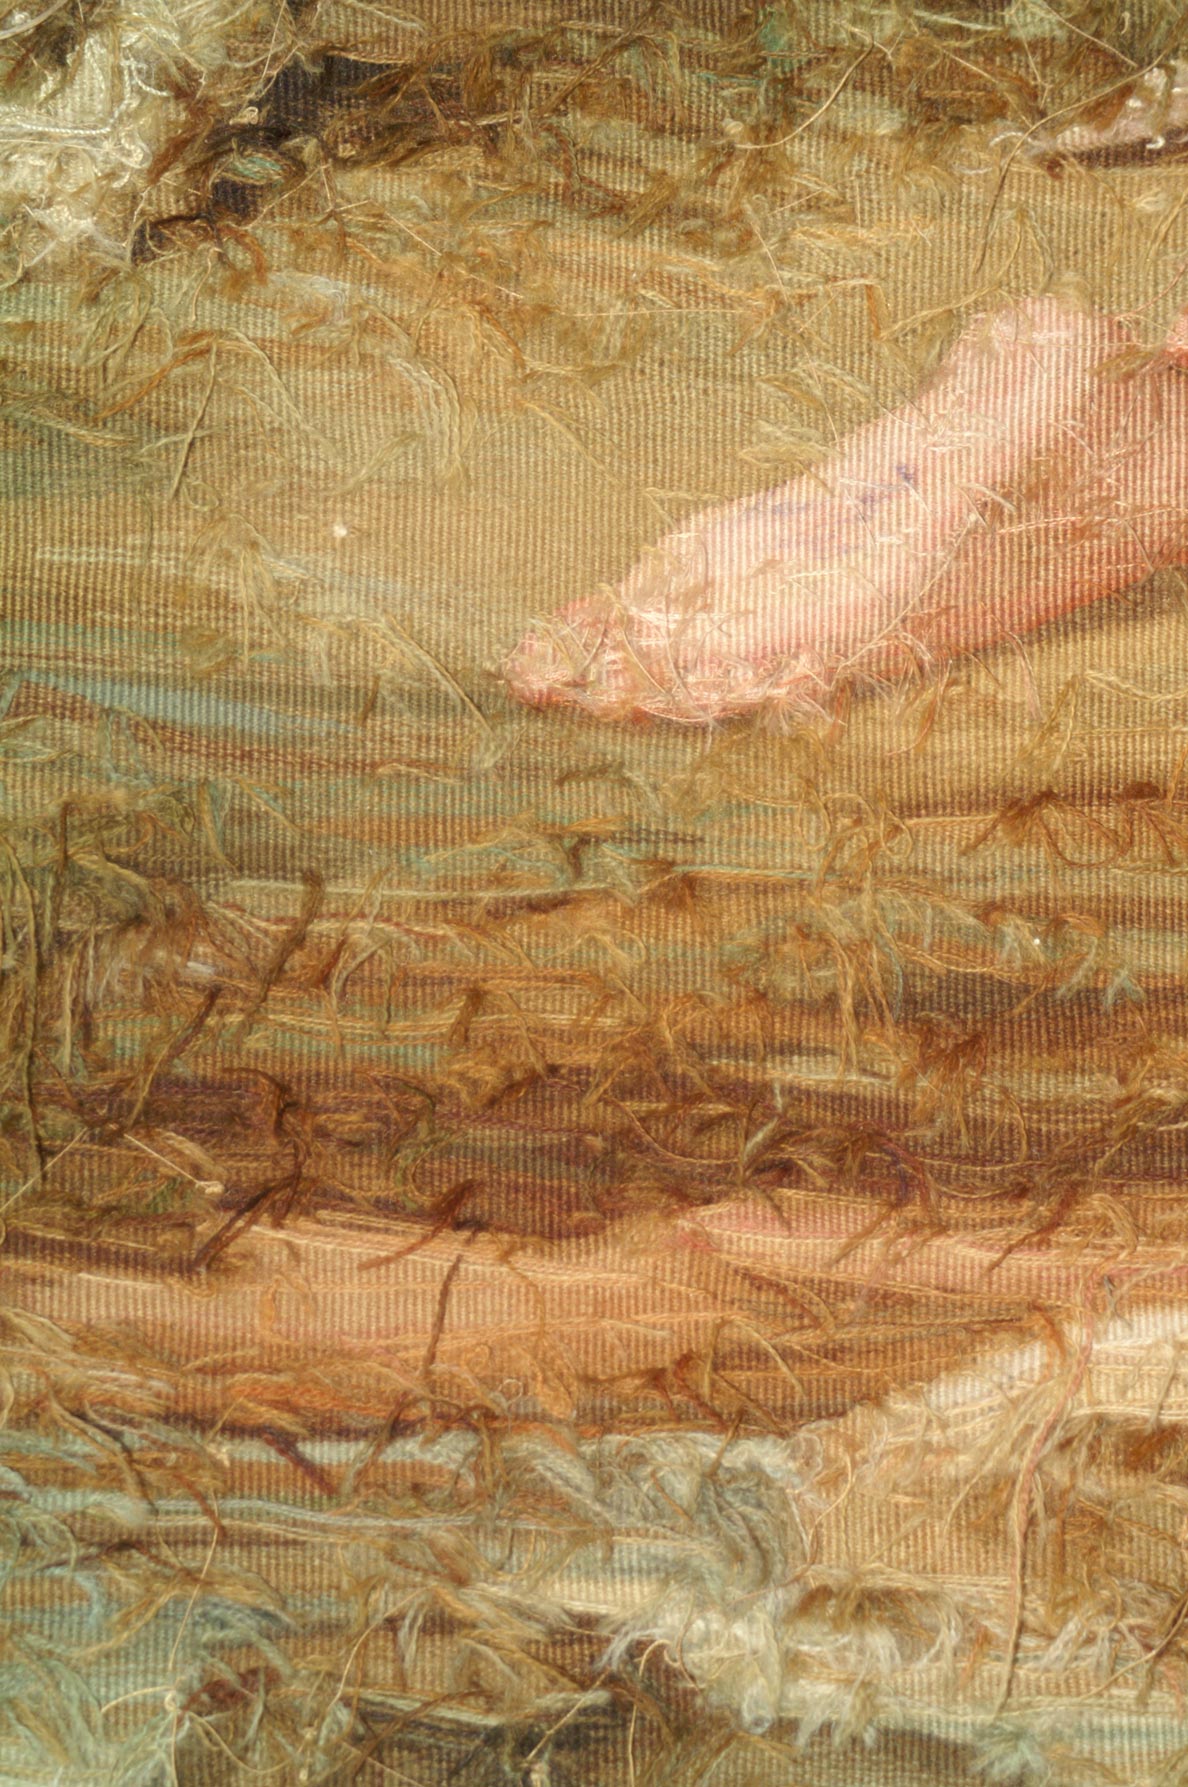 Detail of figure (foot) showing weave from back side